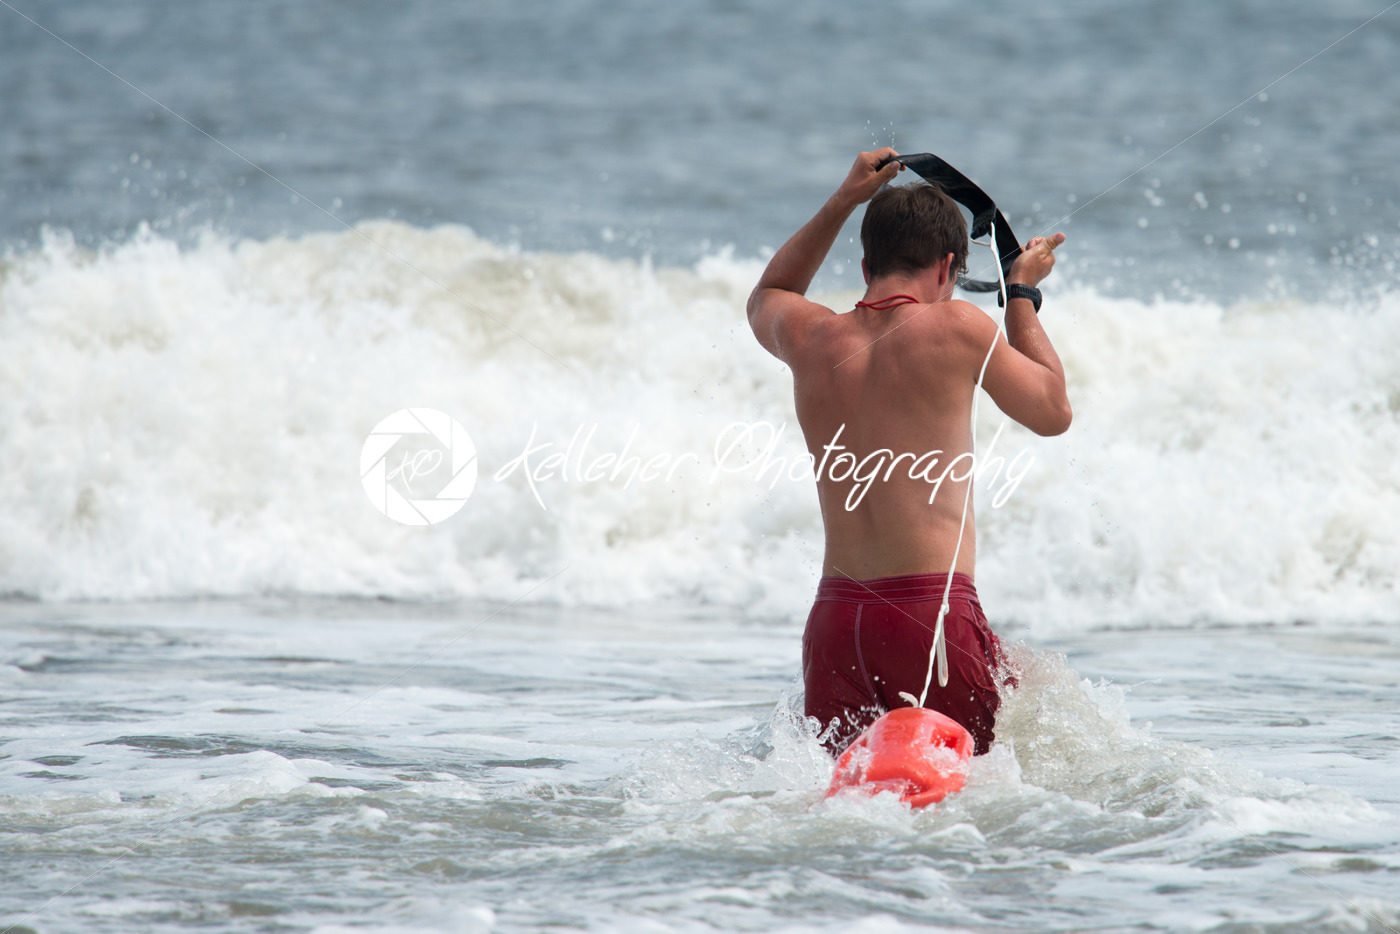 MARGATE CITY, NJ – AUGUST 8: Margate City Lifeguard running into the Atlantic Ocean to rescue a swimmer in distress - Kelleher Photography Store